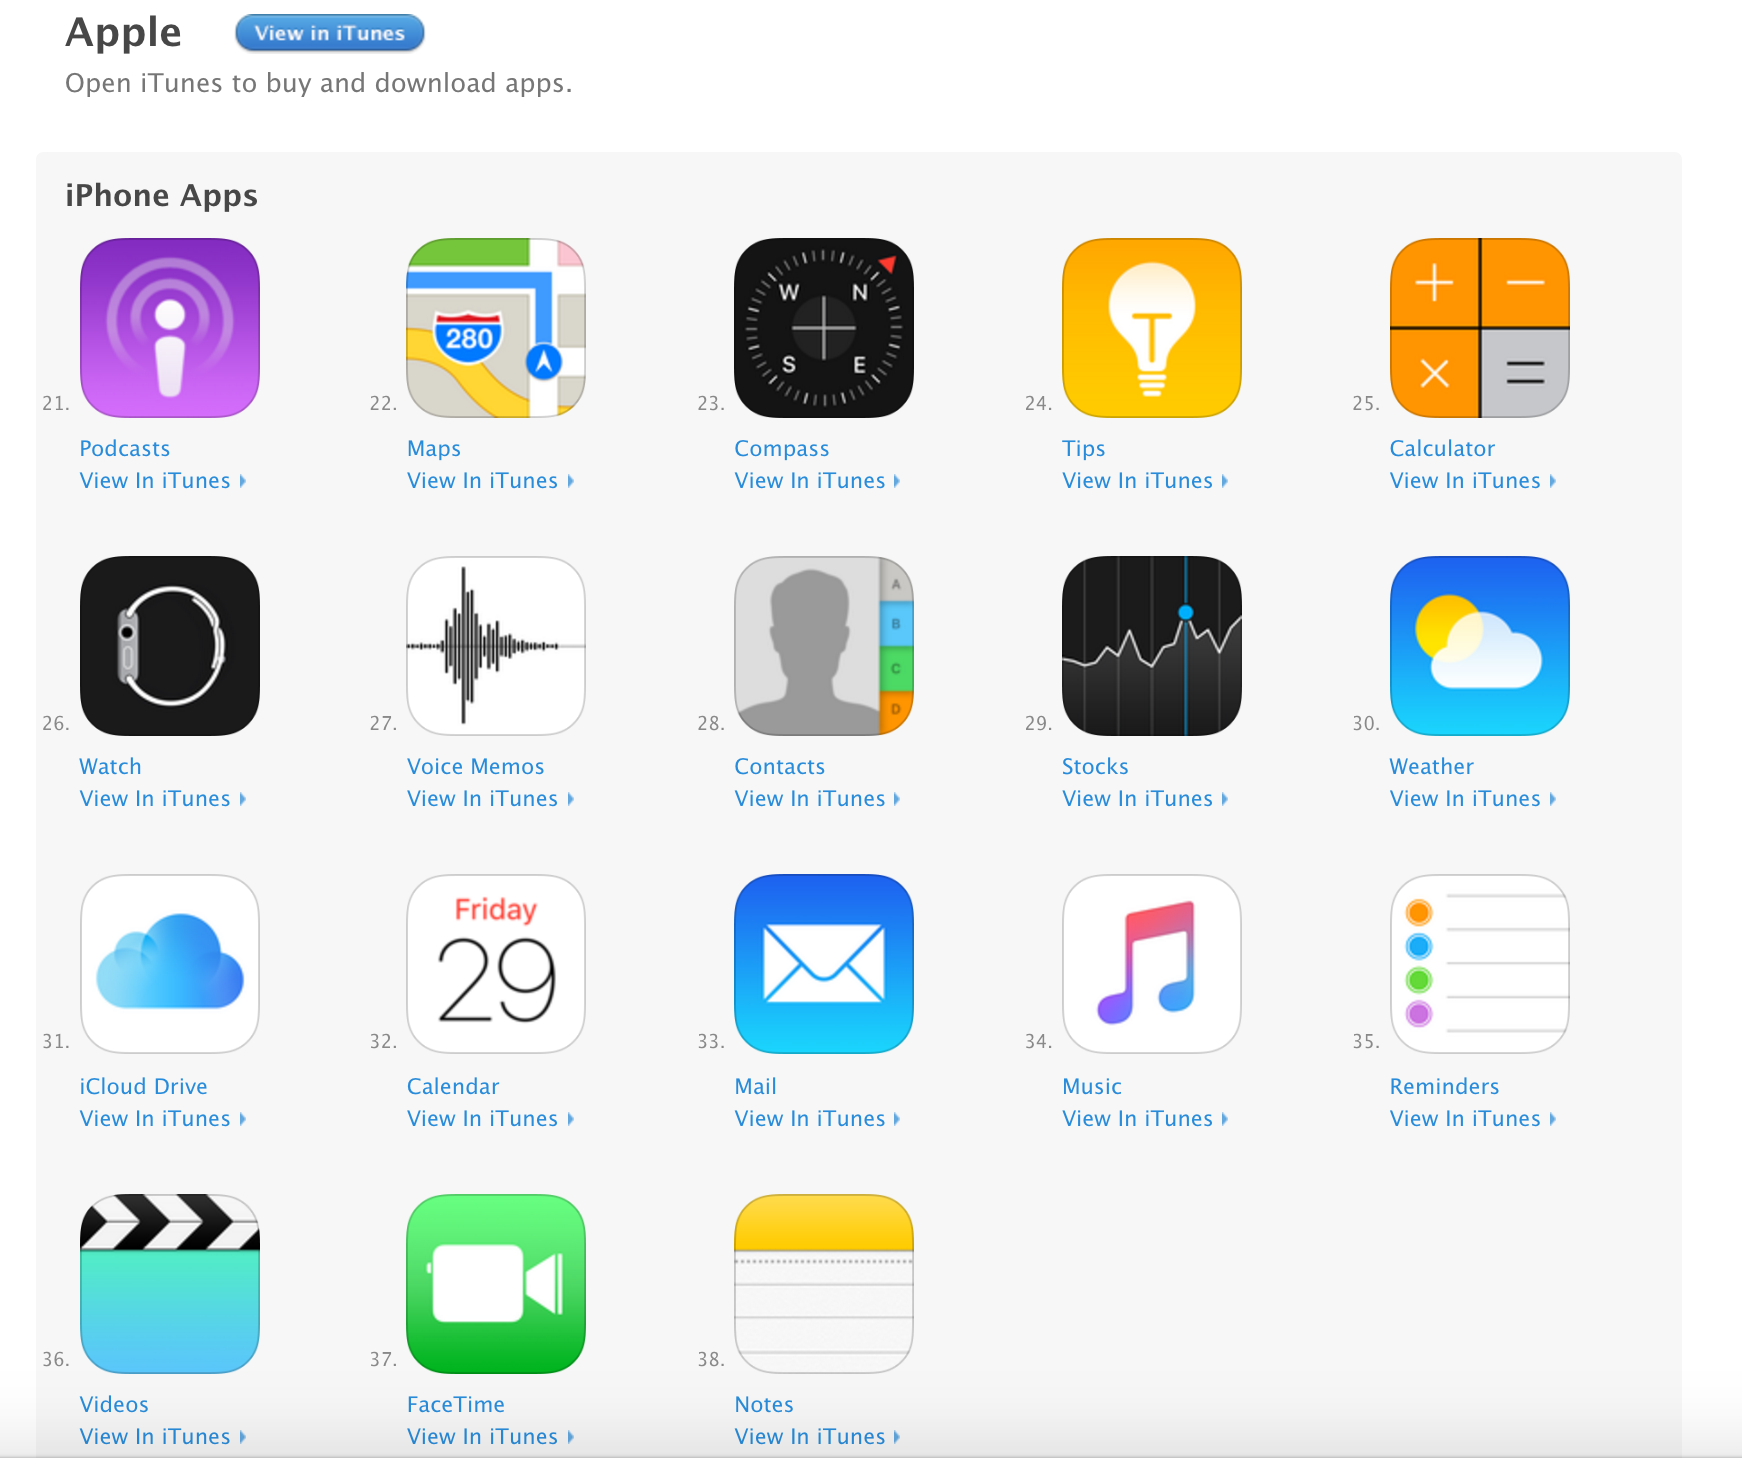 Apple unbundles its native apps like Mail, Maps, Music and more, puts